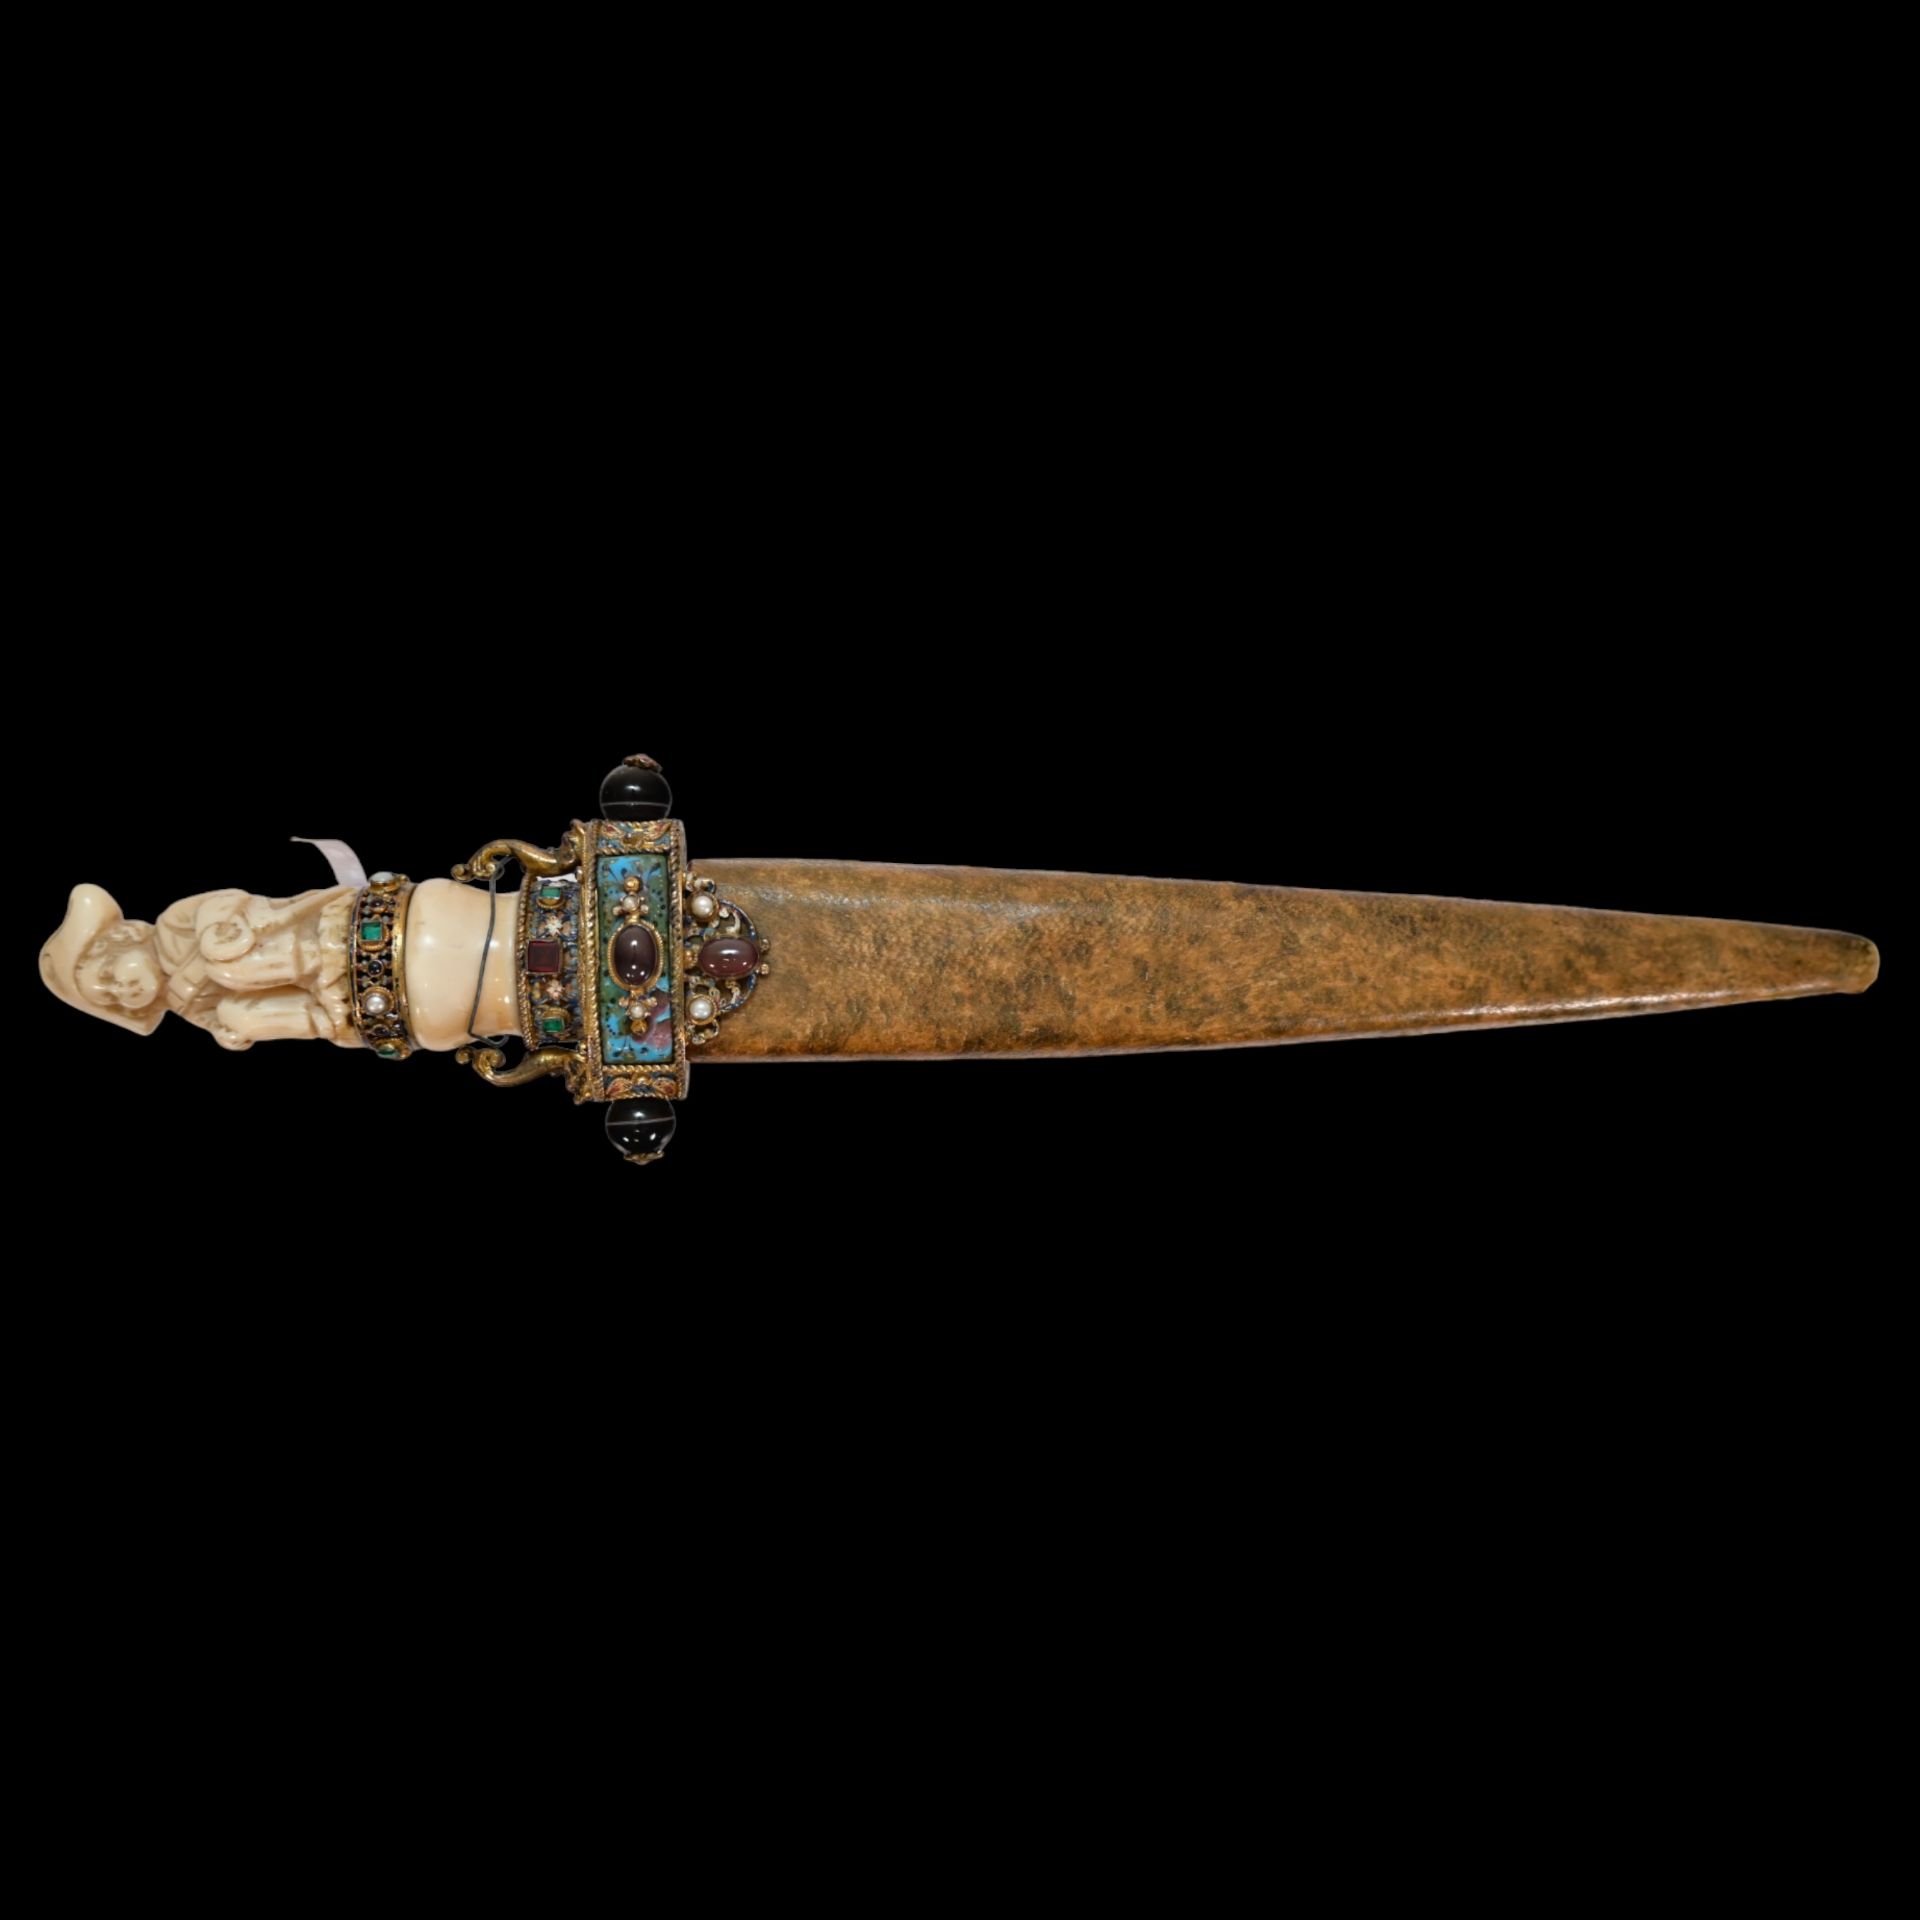 A unique Austrian dagger with a carved bone hilt decorated with gold, precious stones and enamel. - Image 2 of 19